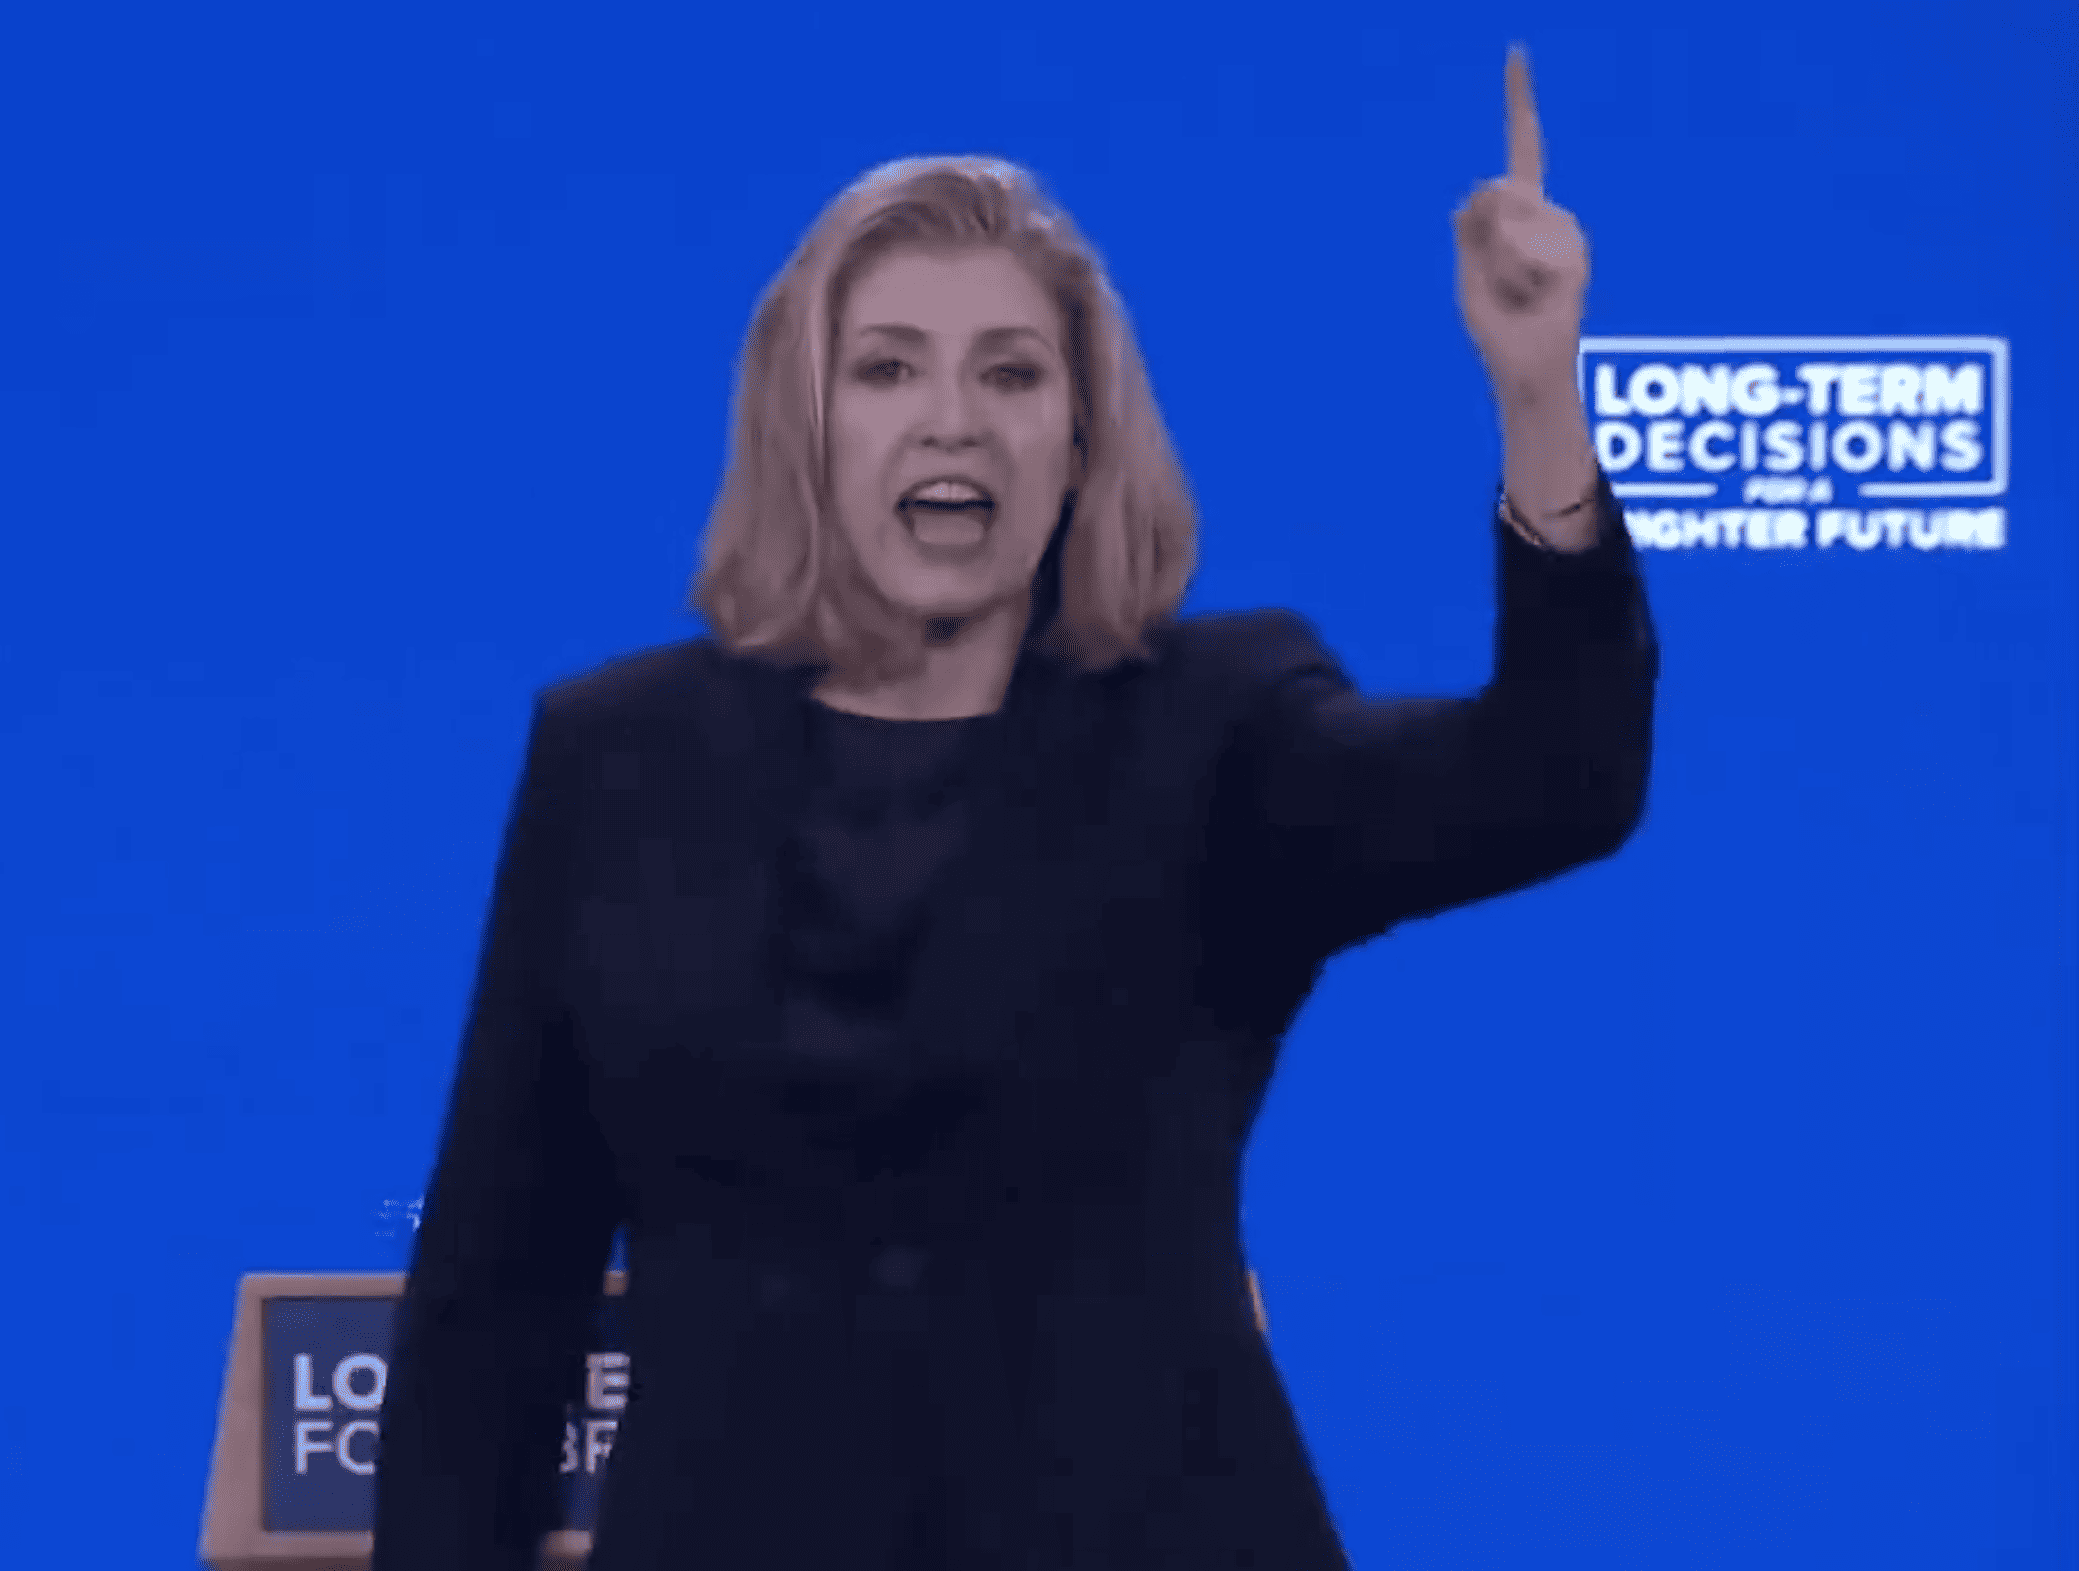 Penny Mordaunt’s fighter speech ruthlessly trolled